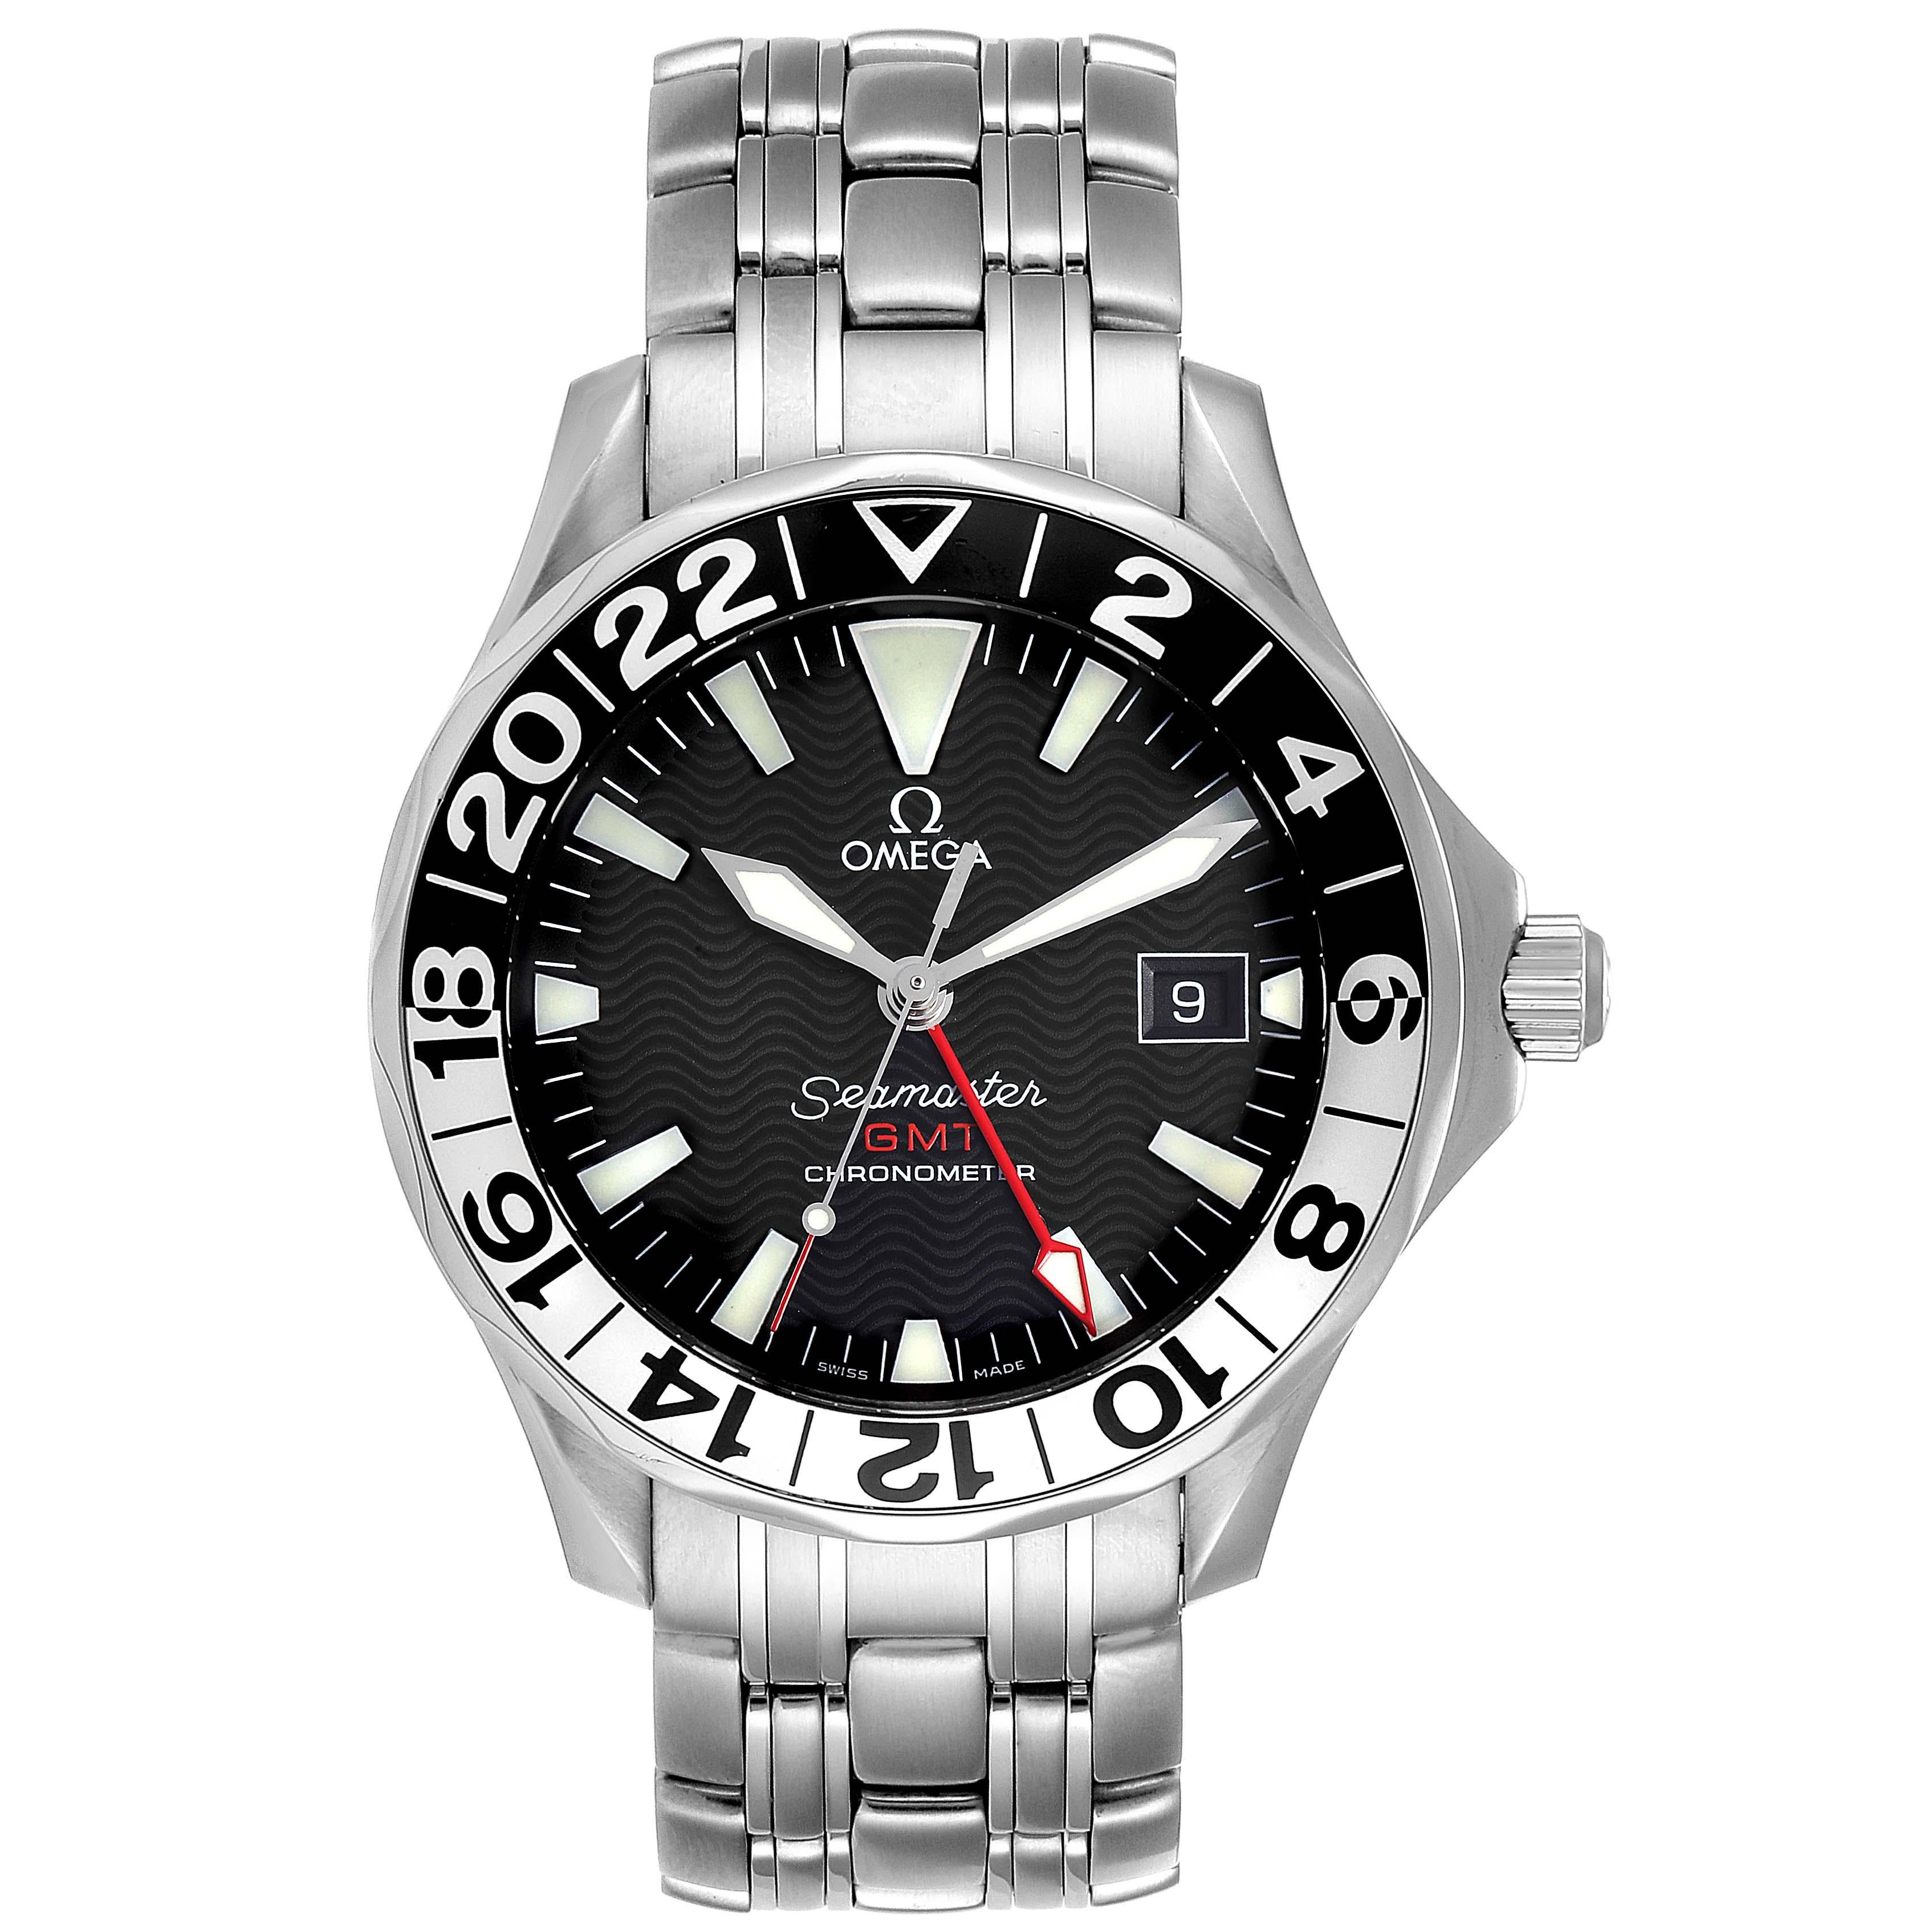 Omega Seamaster GMT 50th Anniversary Steel Mens Watch 2534.50.00. . Brushed and polished stainless steel case 41 mm in diameter. Omega logo on a crown. 24 hours bi-directional rotating bezel. Scratch resistant domed anti-reflective sapphire crystal.